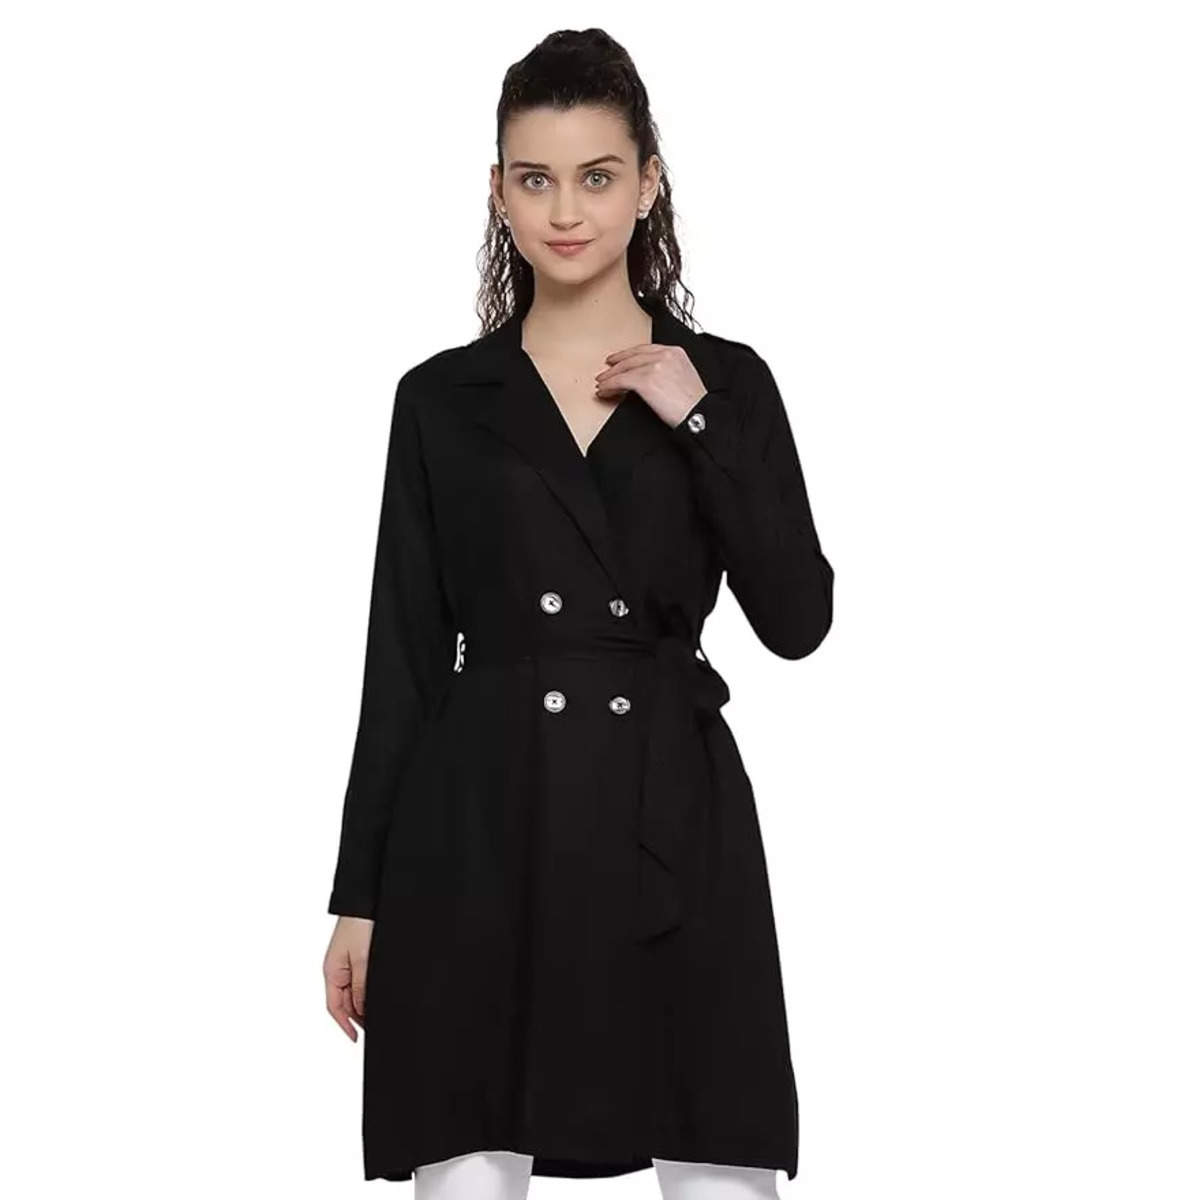 https://img.etimg.com/thumb/width-1200,height-1200,imgsize-12760,resizemode-75,msid-103788720/top-trending-products/lifestyle/black-winter-coat-for-women-under-999-for-warmth-under-budget.jpg